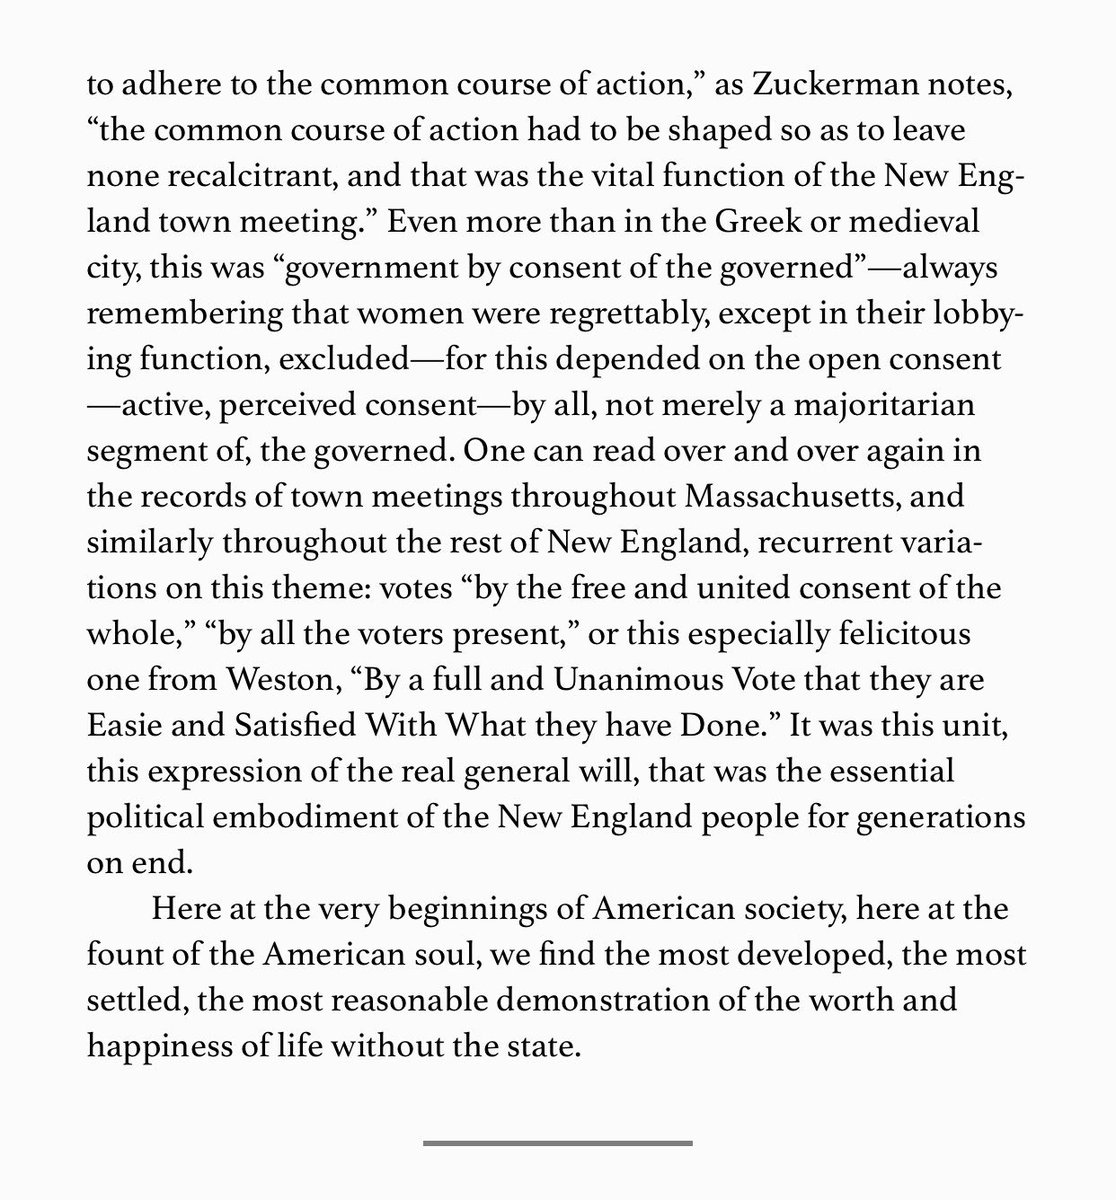 “It is probably among the classic New England towns of the eighteenth century that the best modern example of the essentially stateless society is to be found.” — Kirkpatrick Saleon the decentralist tradition once common in the Occident.